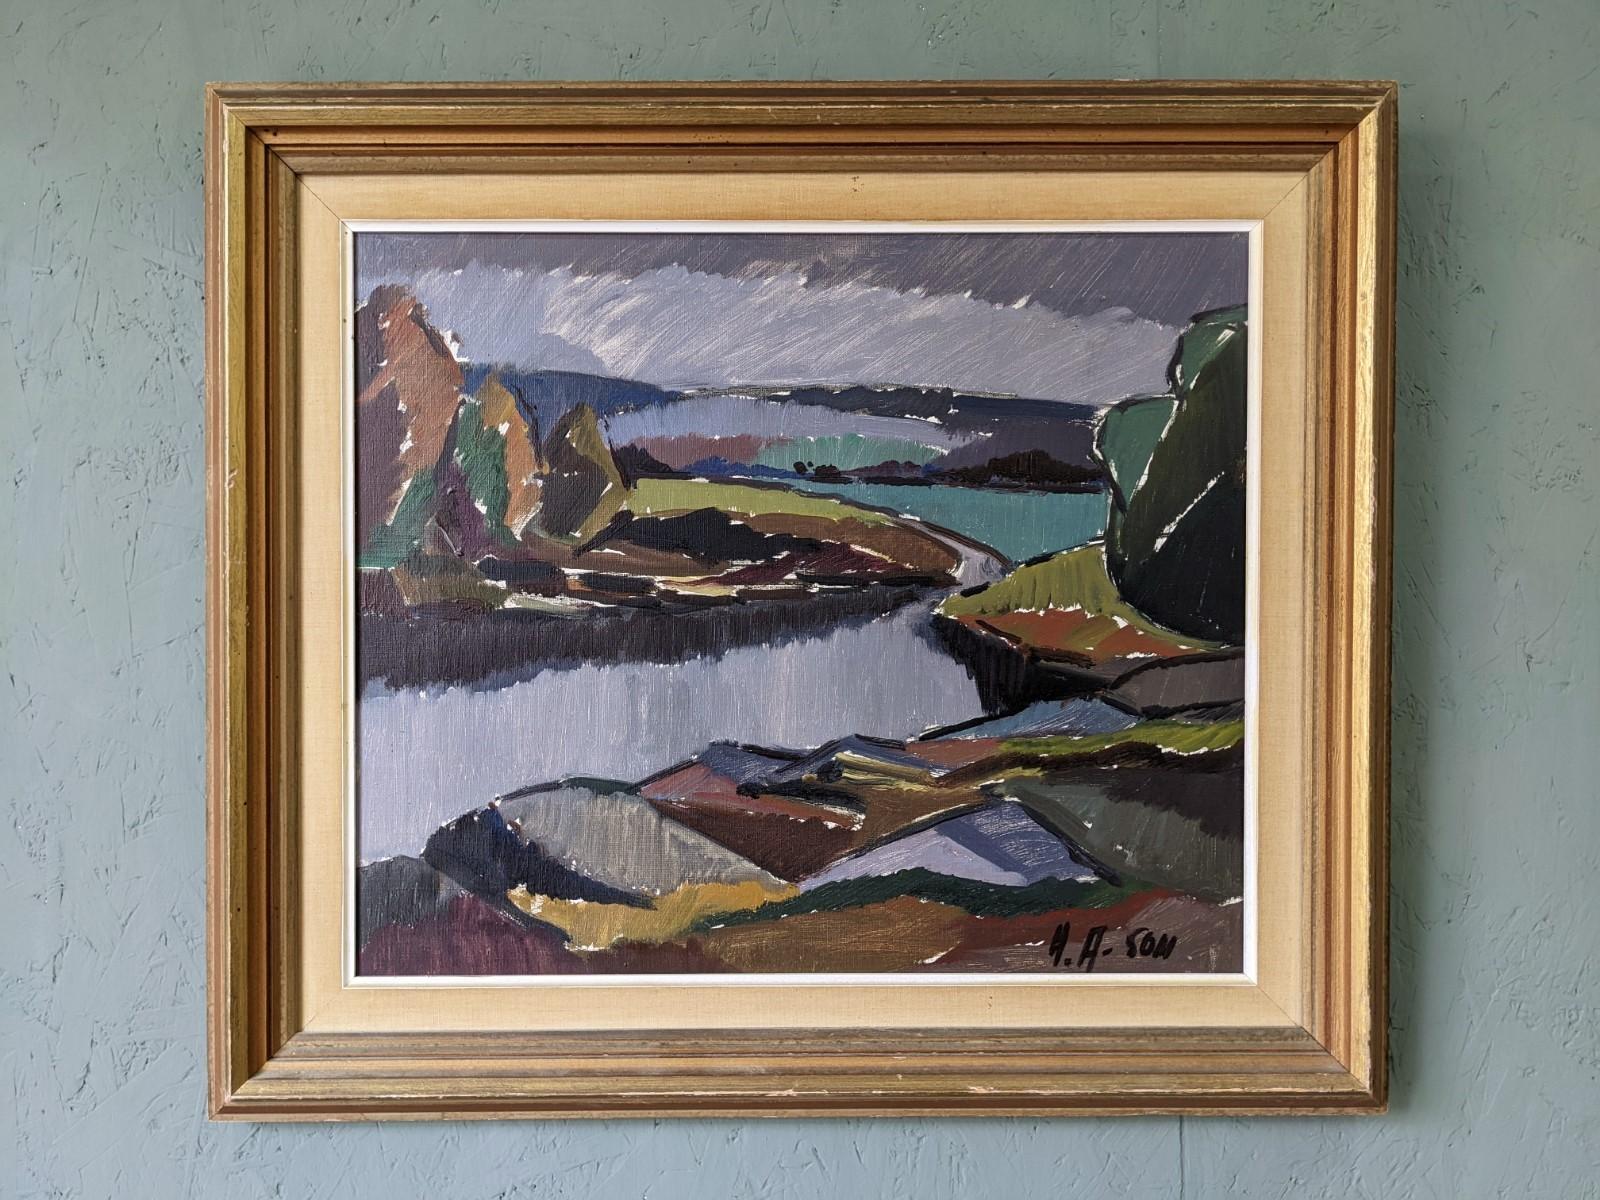 MEANDER
Size: 62 x 71 cm (including frame)
Oil on Canvas

An energetic and expressive mid-century modernist river landscape painting, executed in oil onto canvas.

This scenic nature landscape composition presents a panoramic view of a river